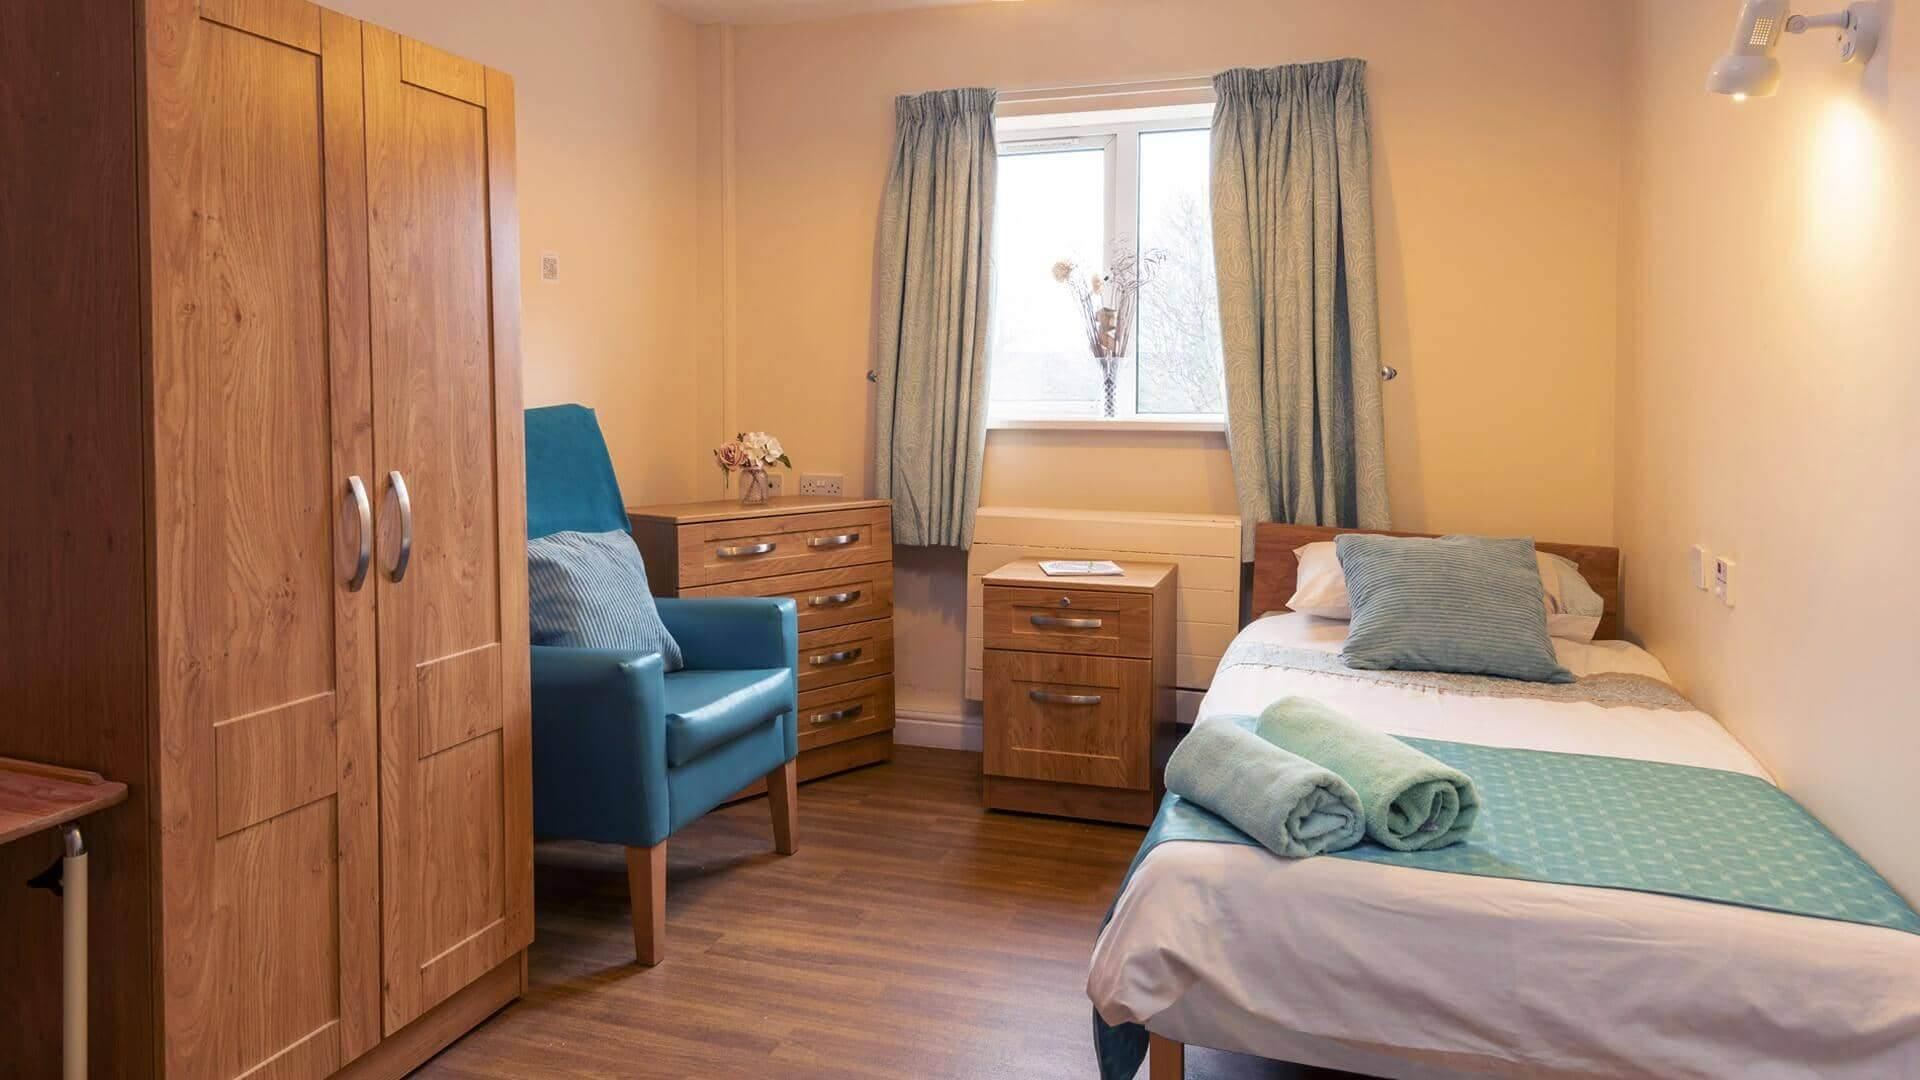 Riverdale care home bedrooms 